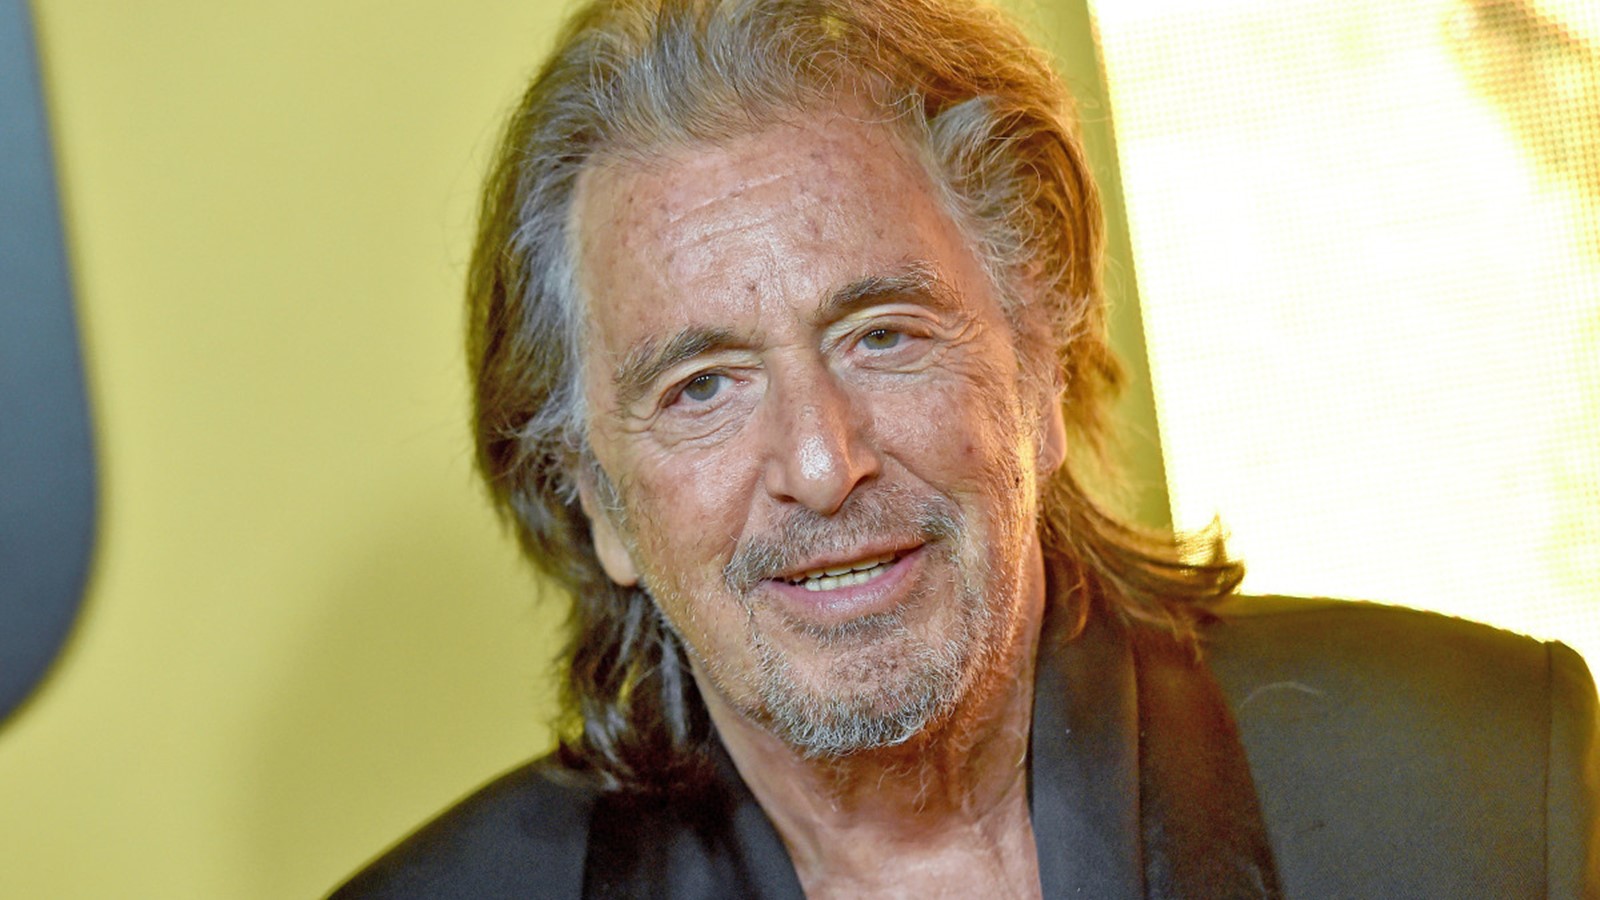 Al Pacino: "I rejected Star Wars, Harrison Ford has a career thanks to me"